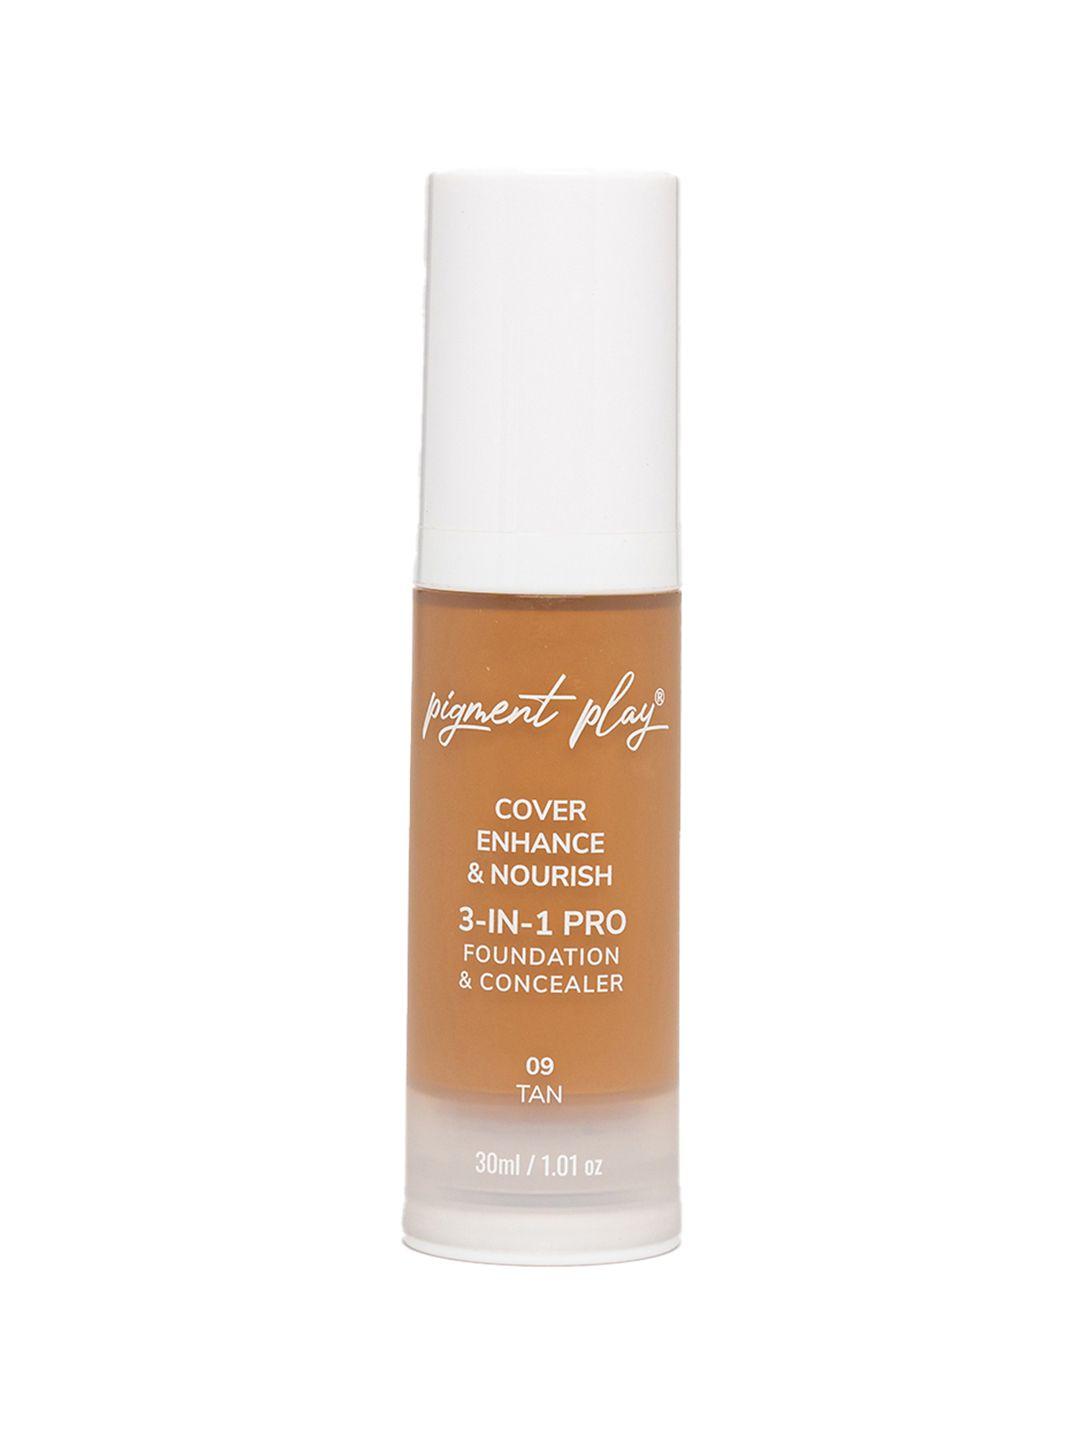 pigment-play-cover-enhance-&-nourish-3-in-1-pro-foundation-&-concealer-30ml---tan-09